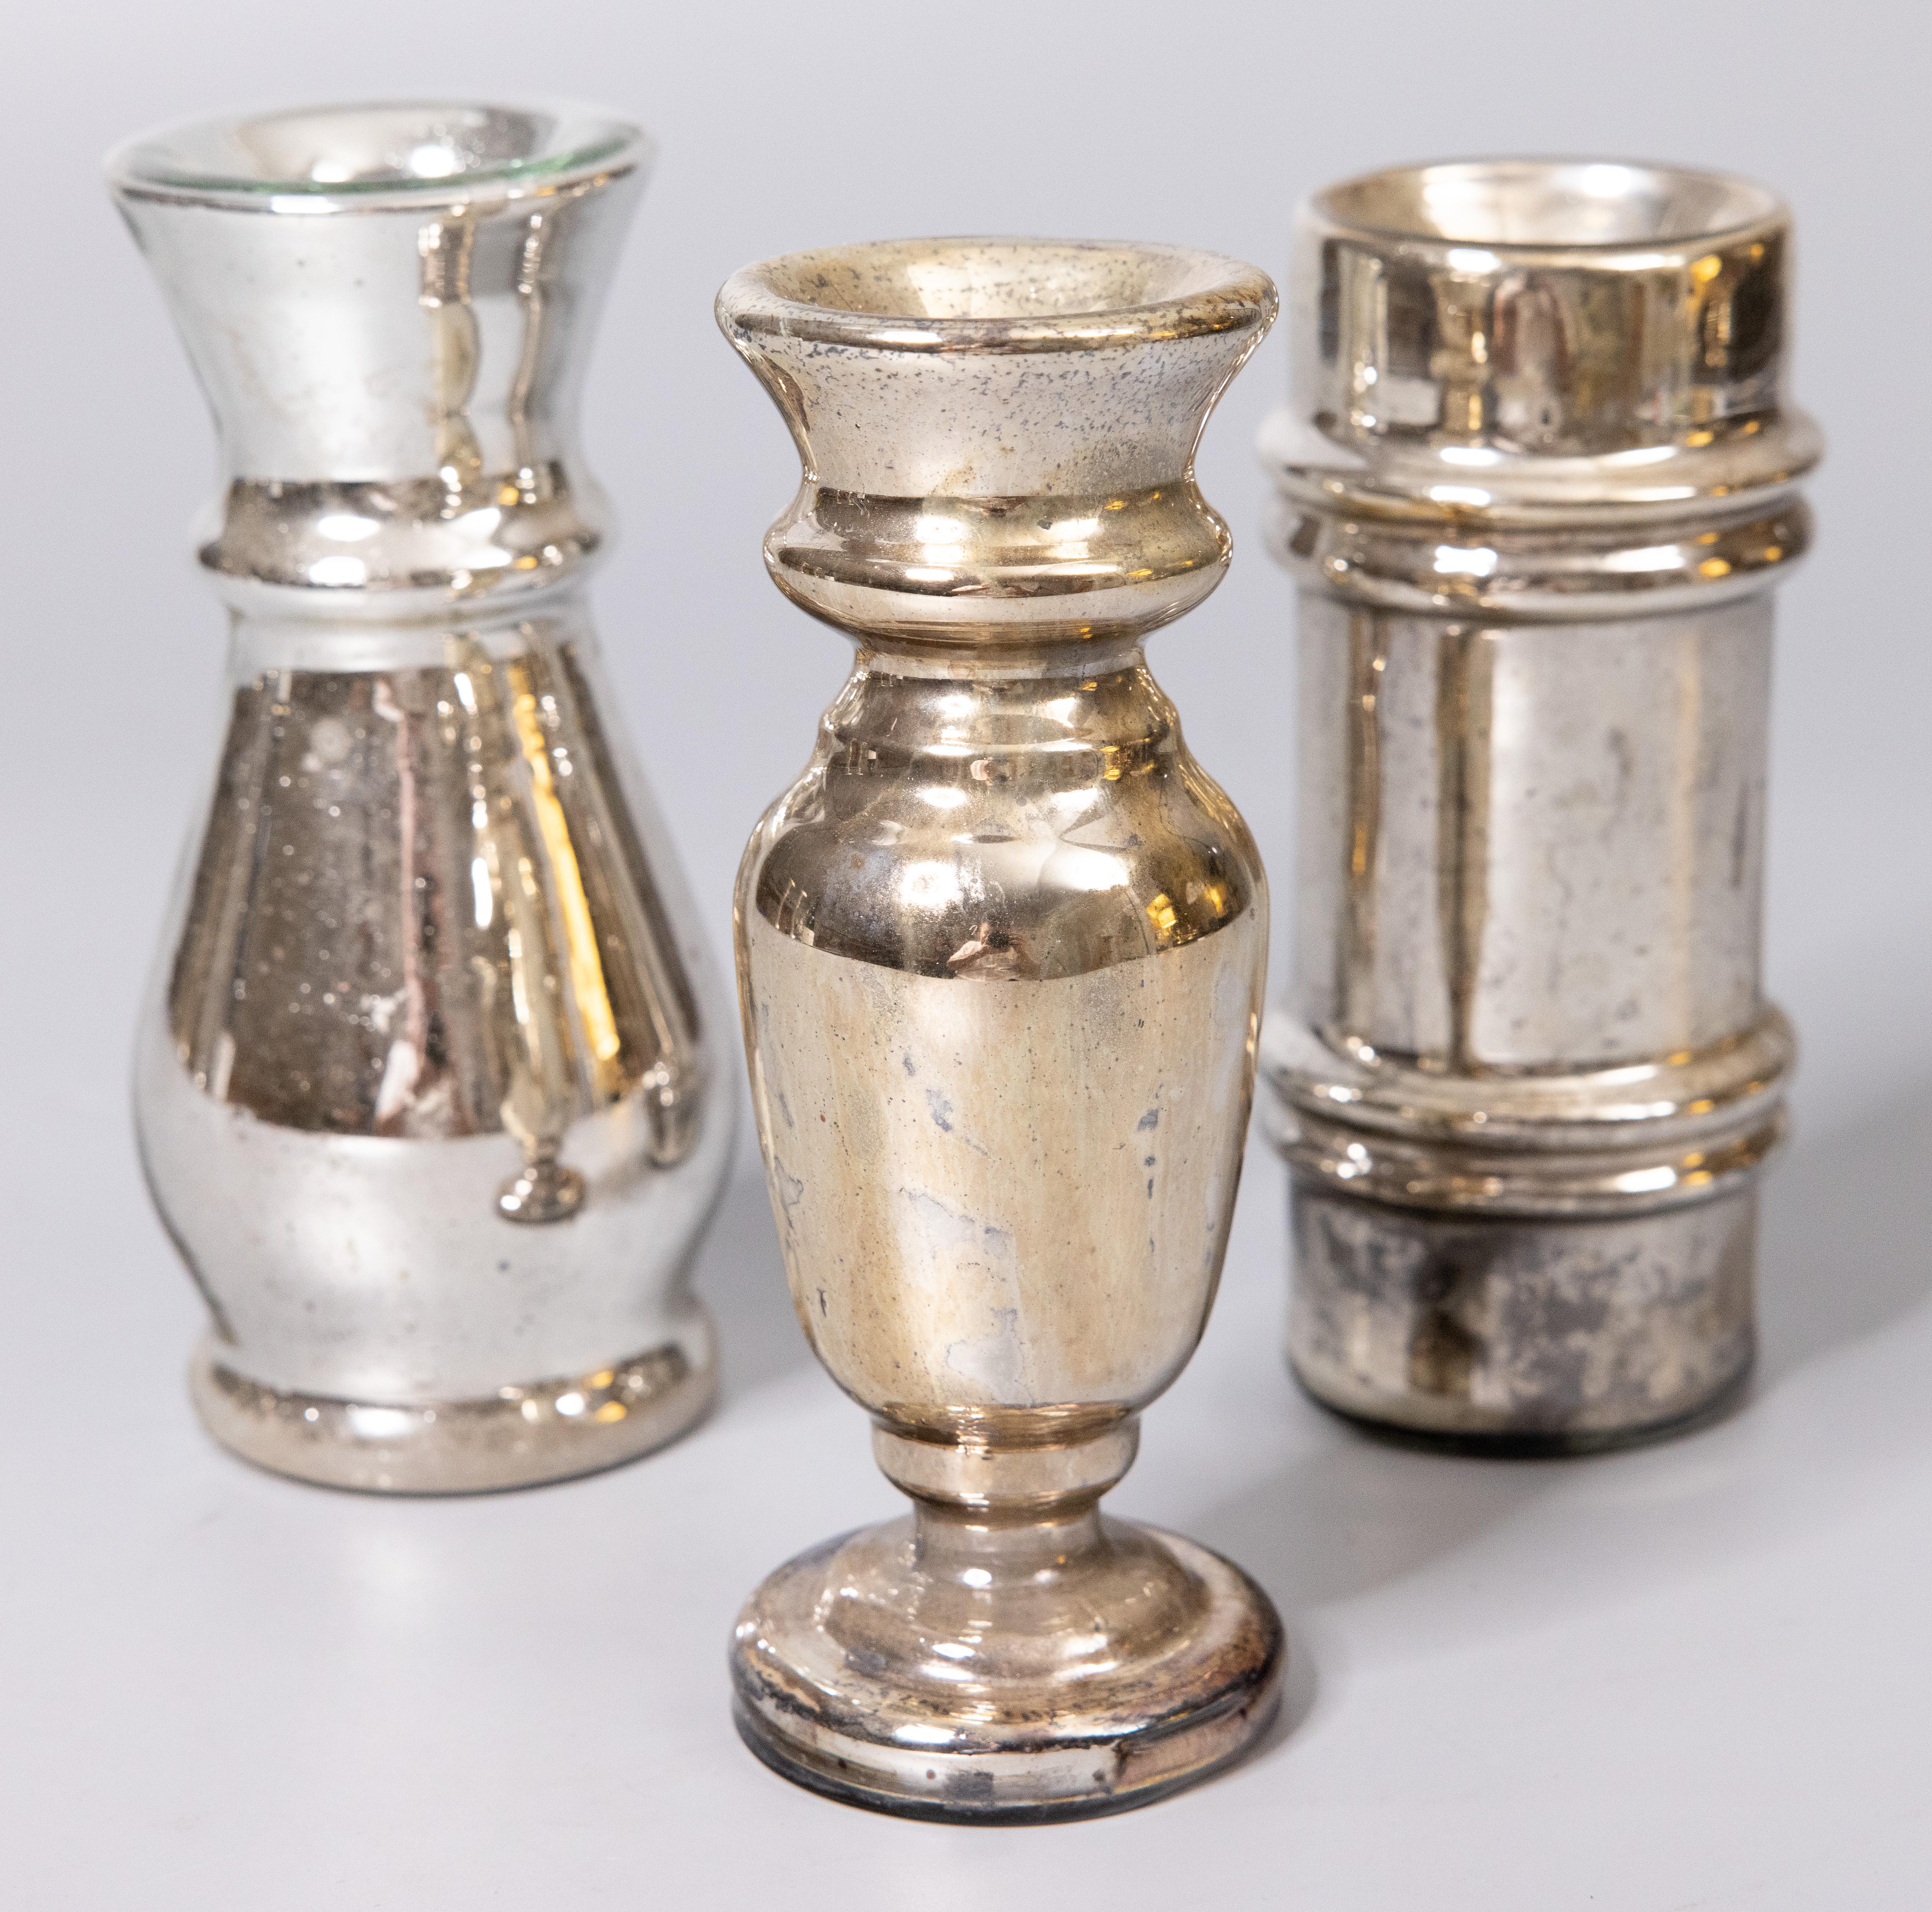 A lovely set of three authentic antique 19th-century hand blown mercury glass decorative vases from England. These stunning vases have stylish shapes in a beautiful patina and would be the perfect room accent pieces.

Dimensions:
2.5